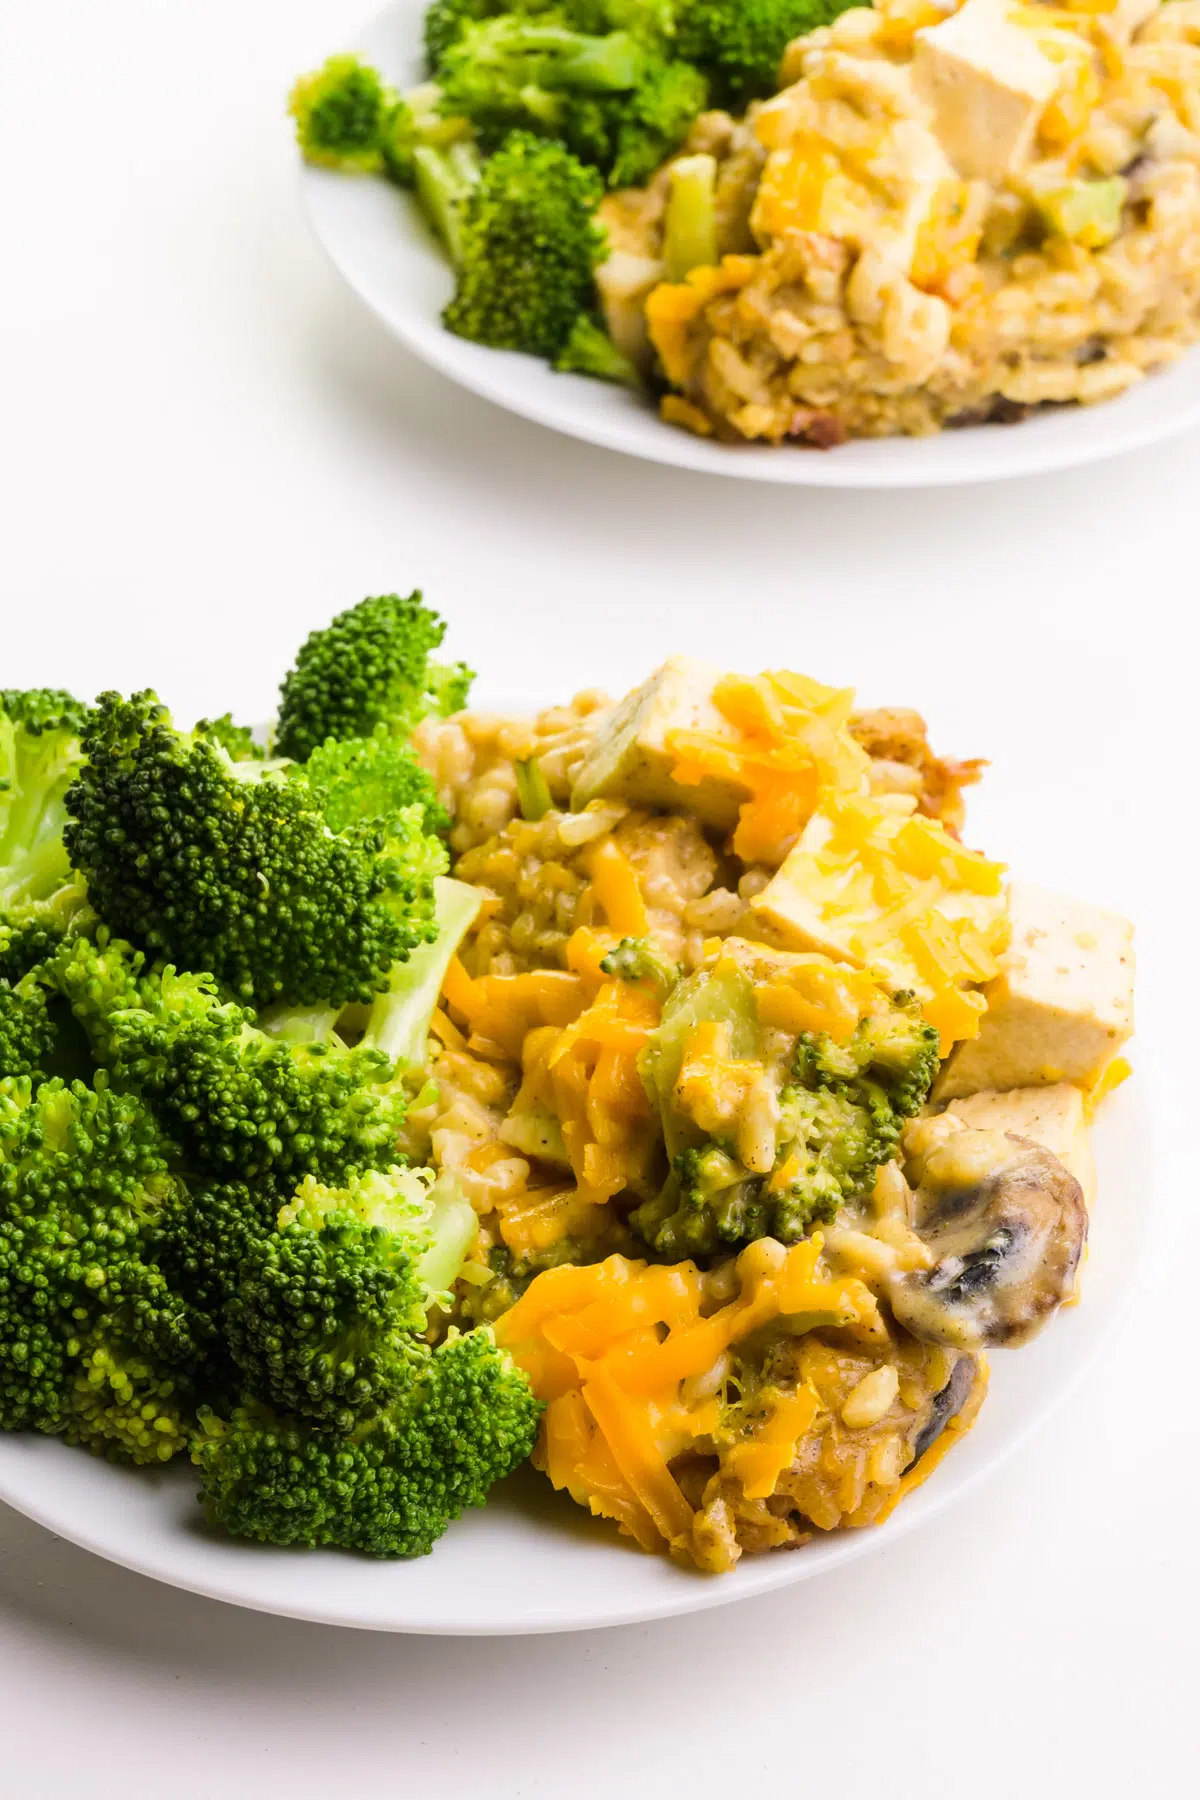 A portion of casserole sits on a plate next to steamed broccoli. There's another similar plate in the background.